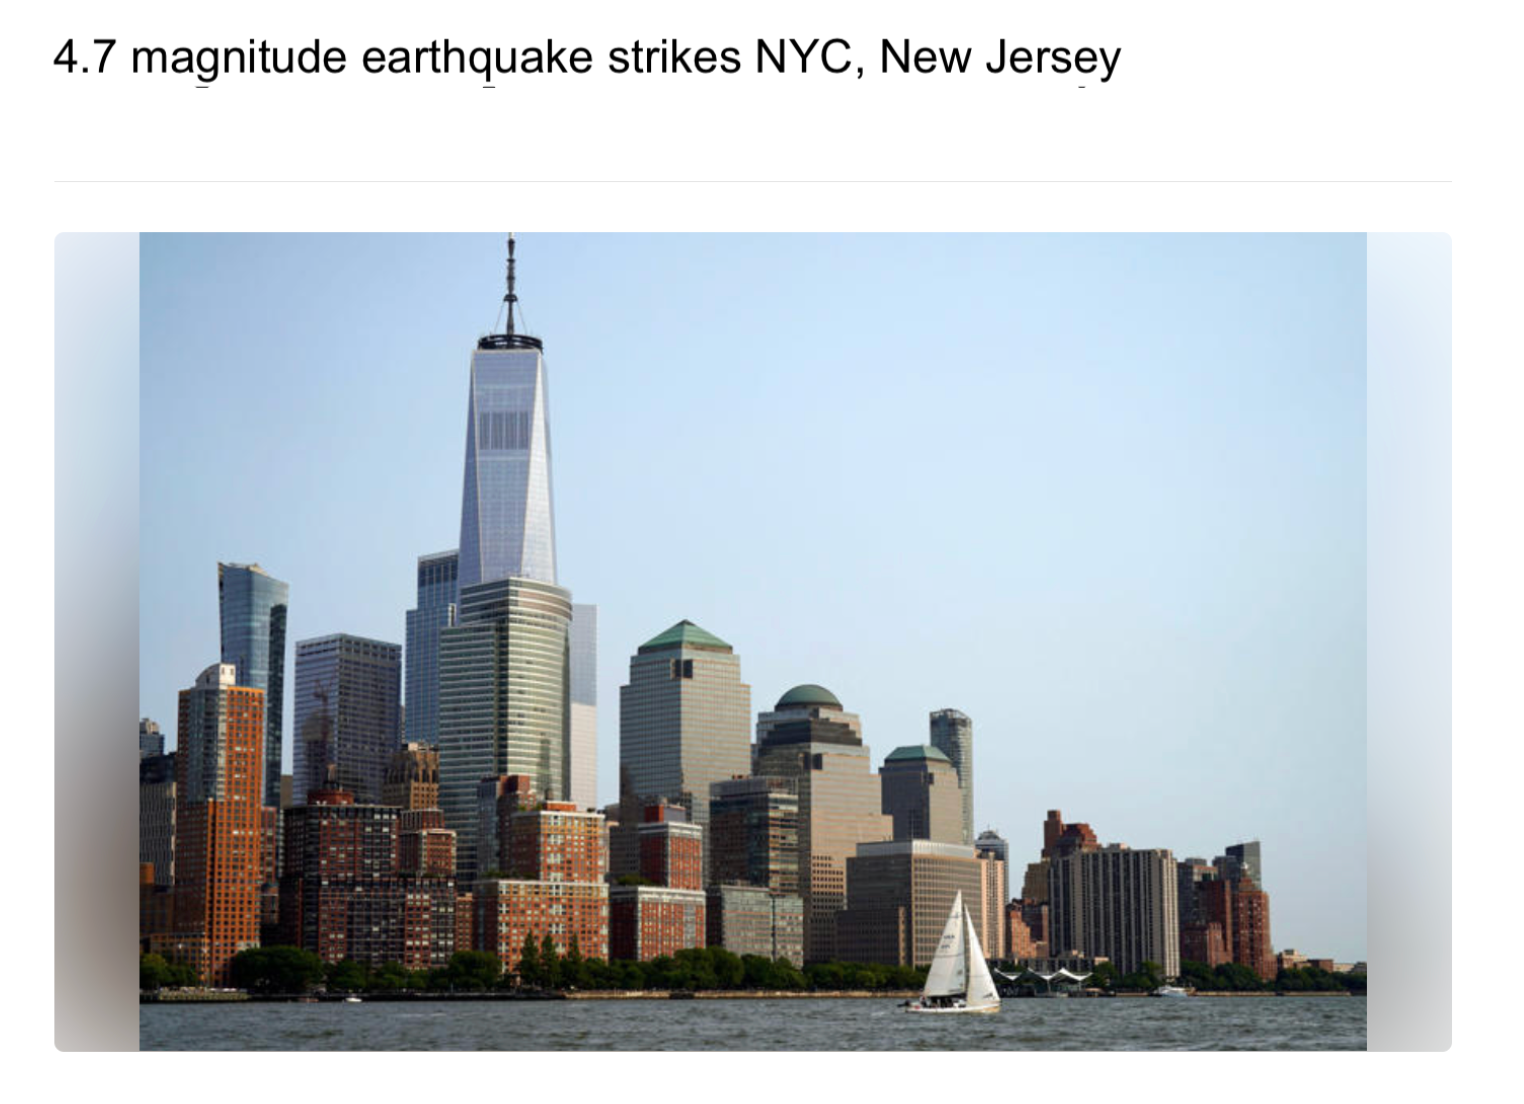 Earthquake in NYC, New Jersey